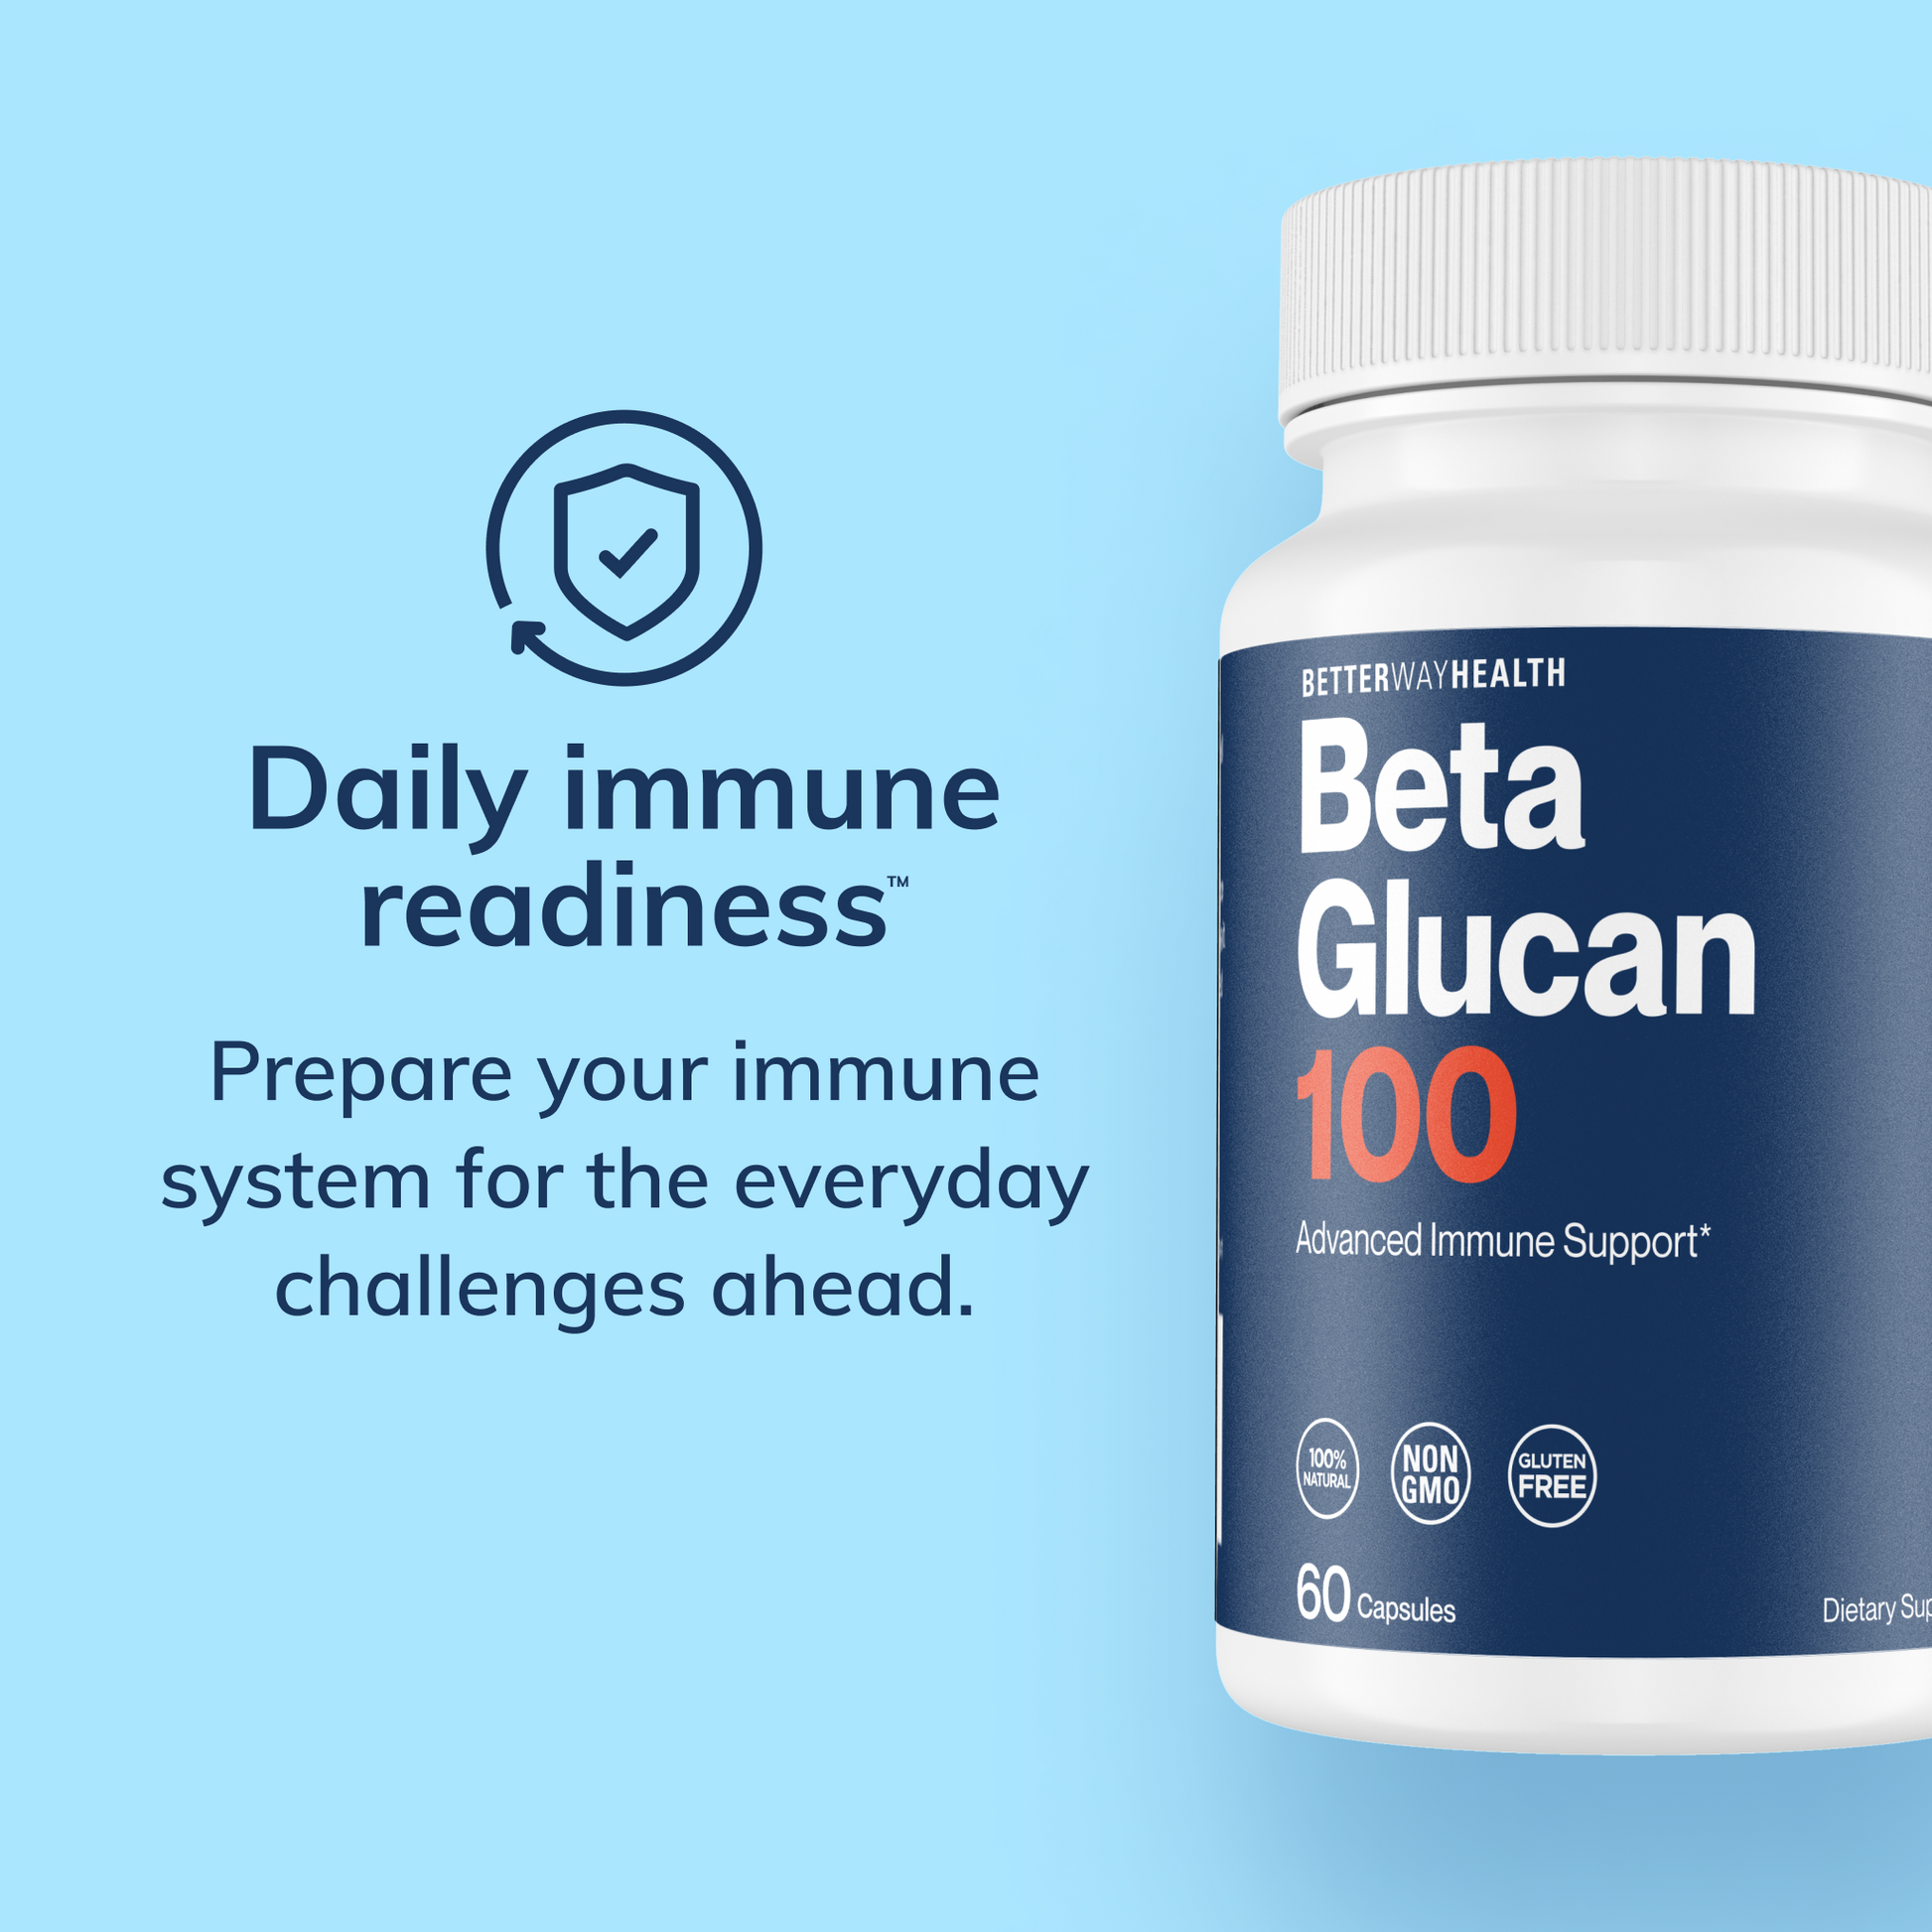 Daily immune readiness supporting info on beta glucan